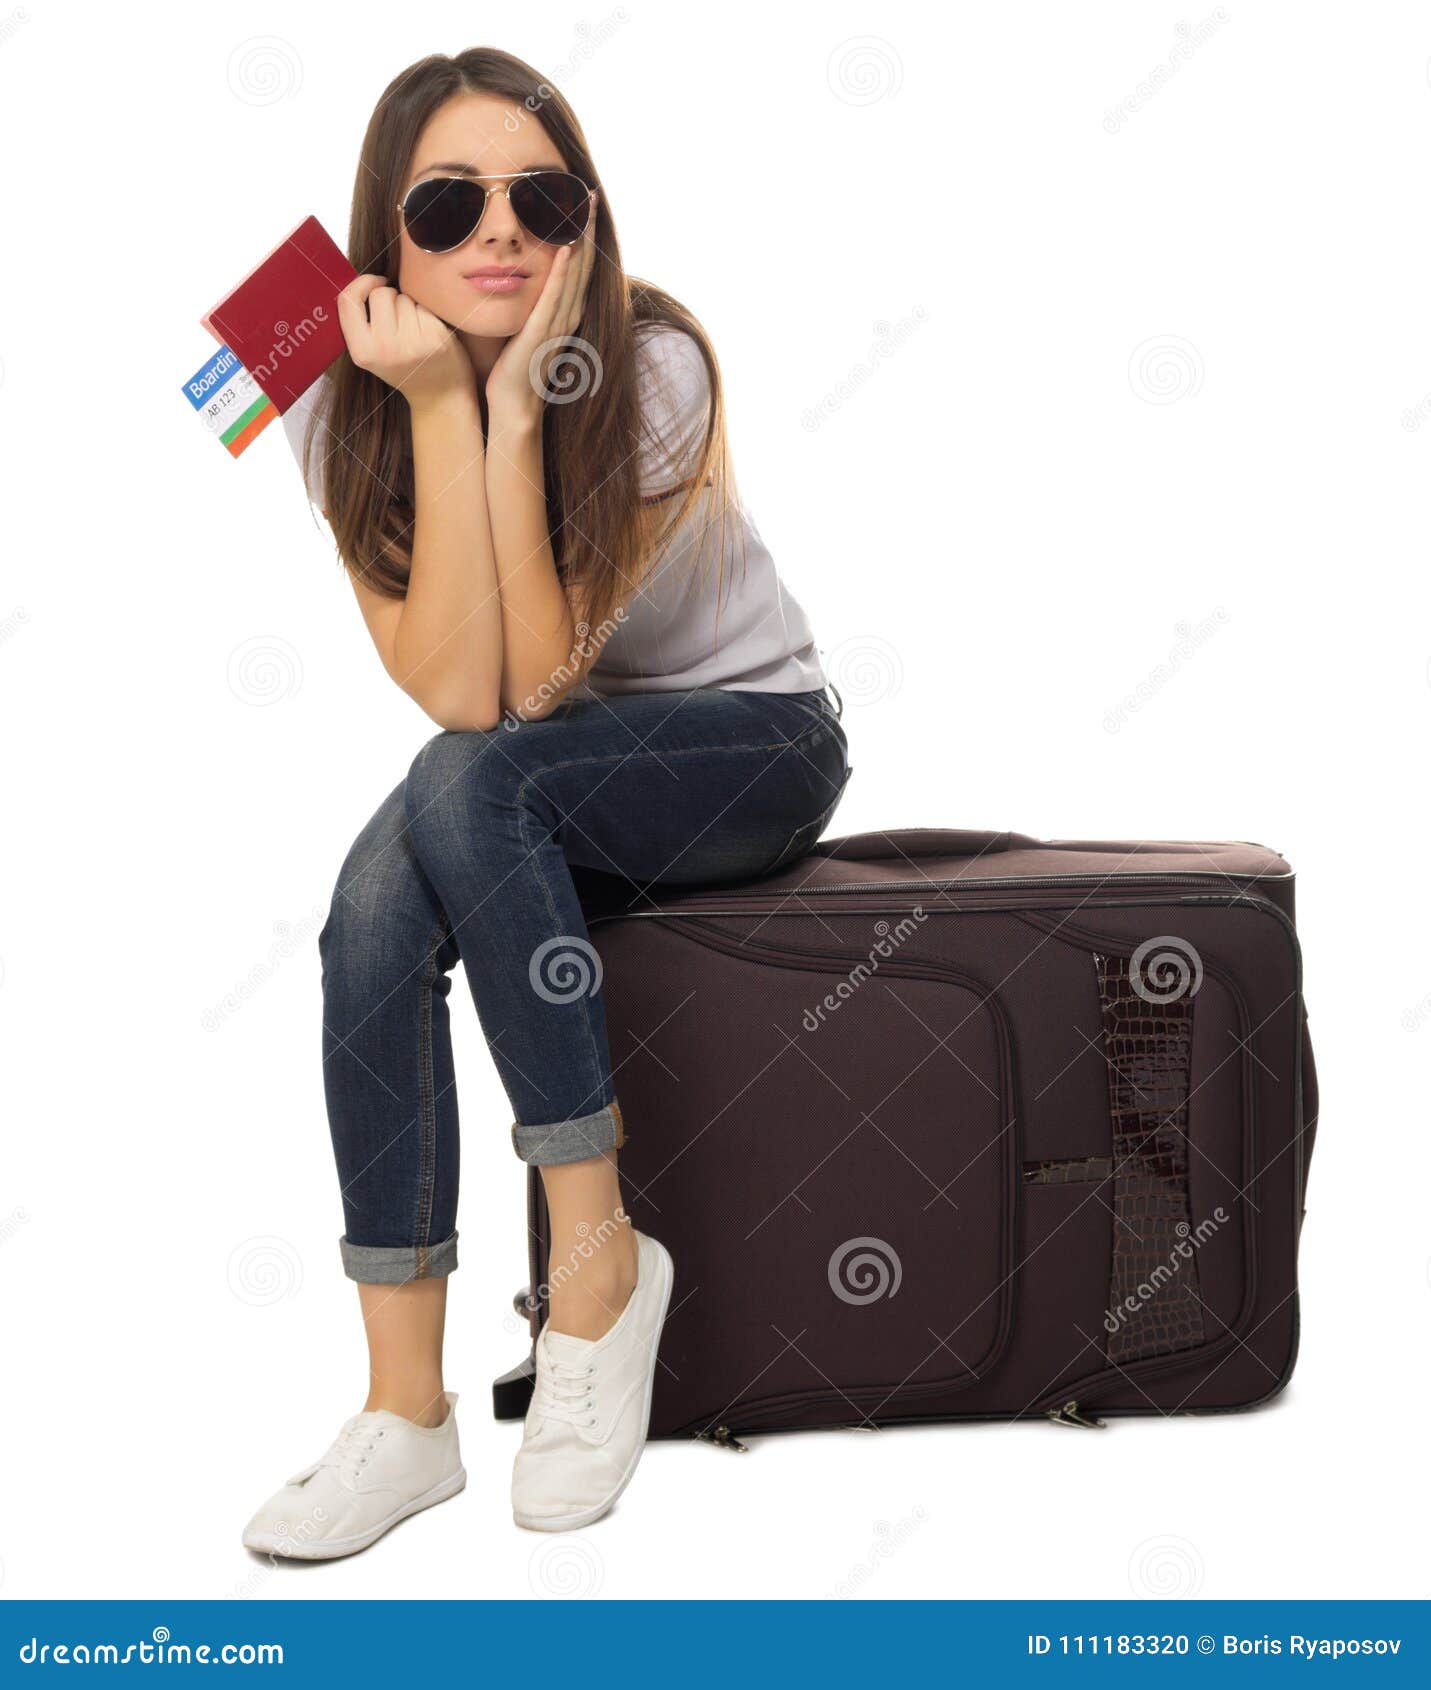 girl travel stock images